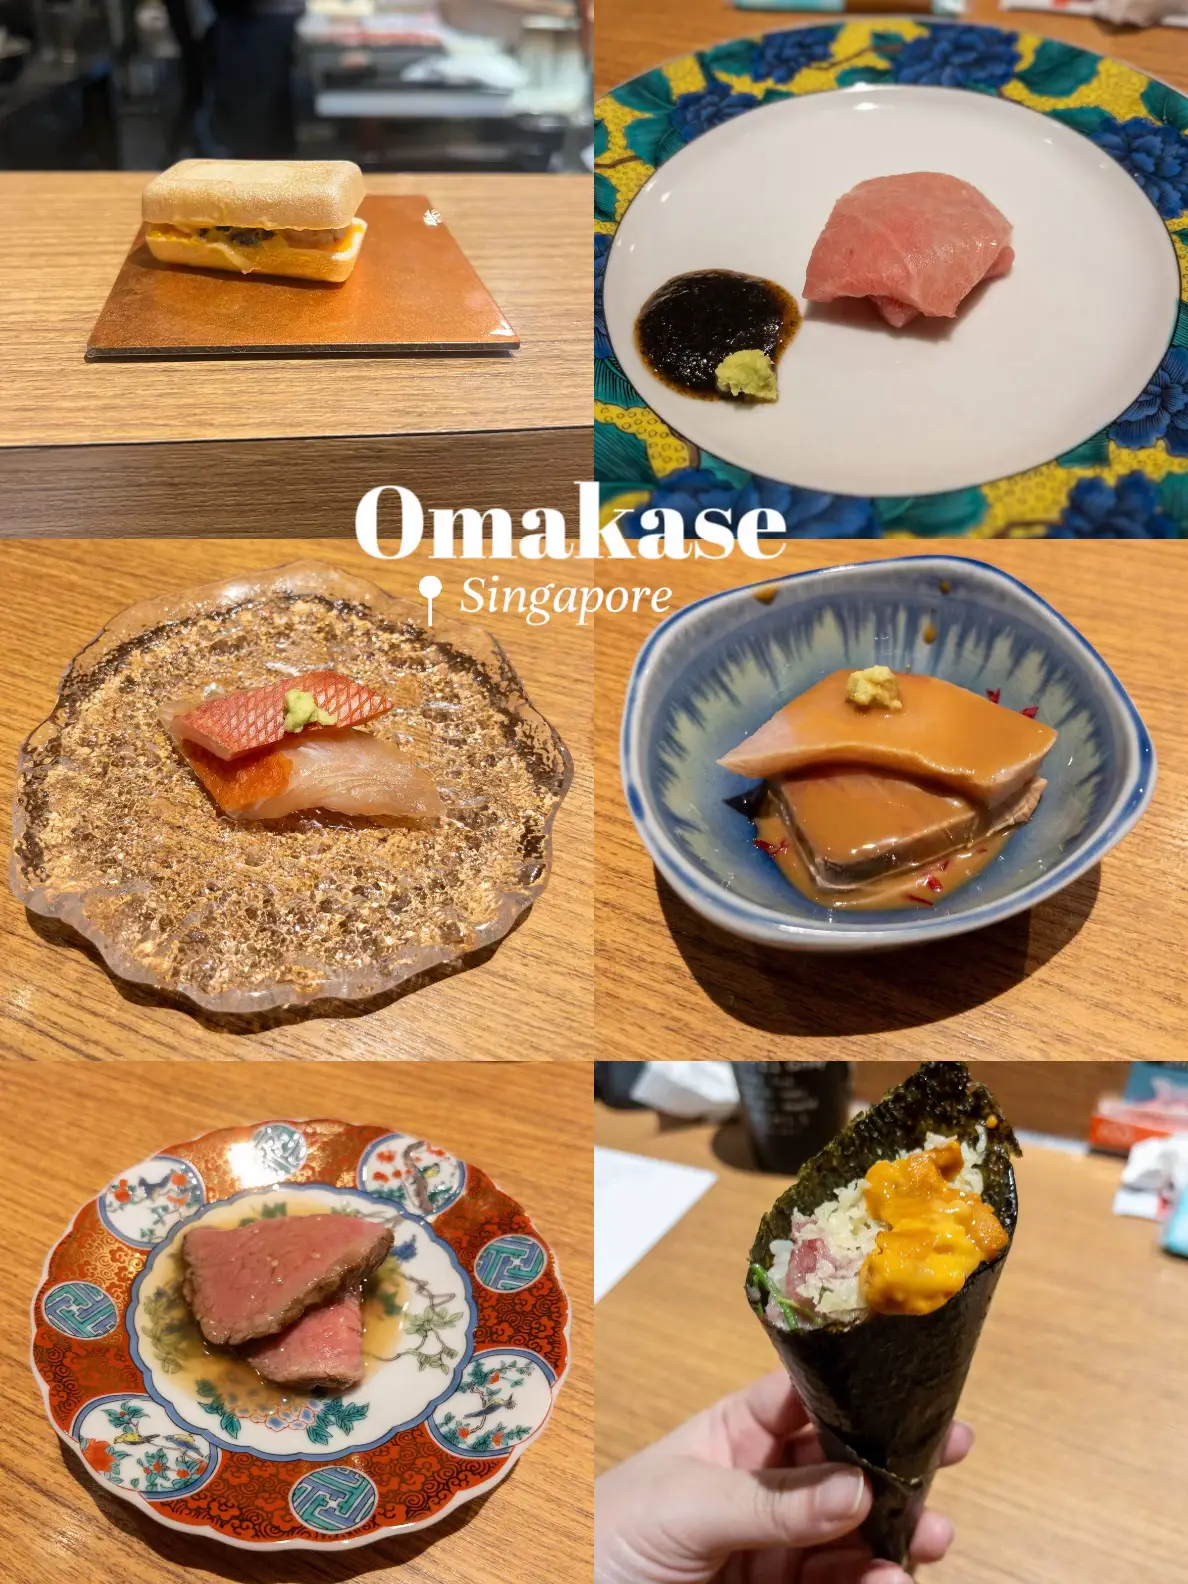 PRICE-WORTHY OMAKASE IN SG 😍's images